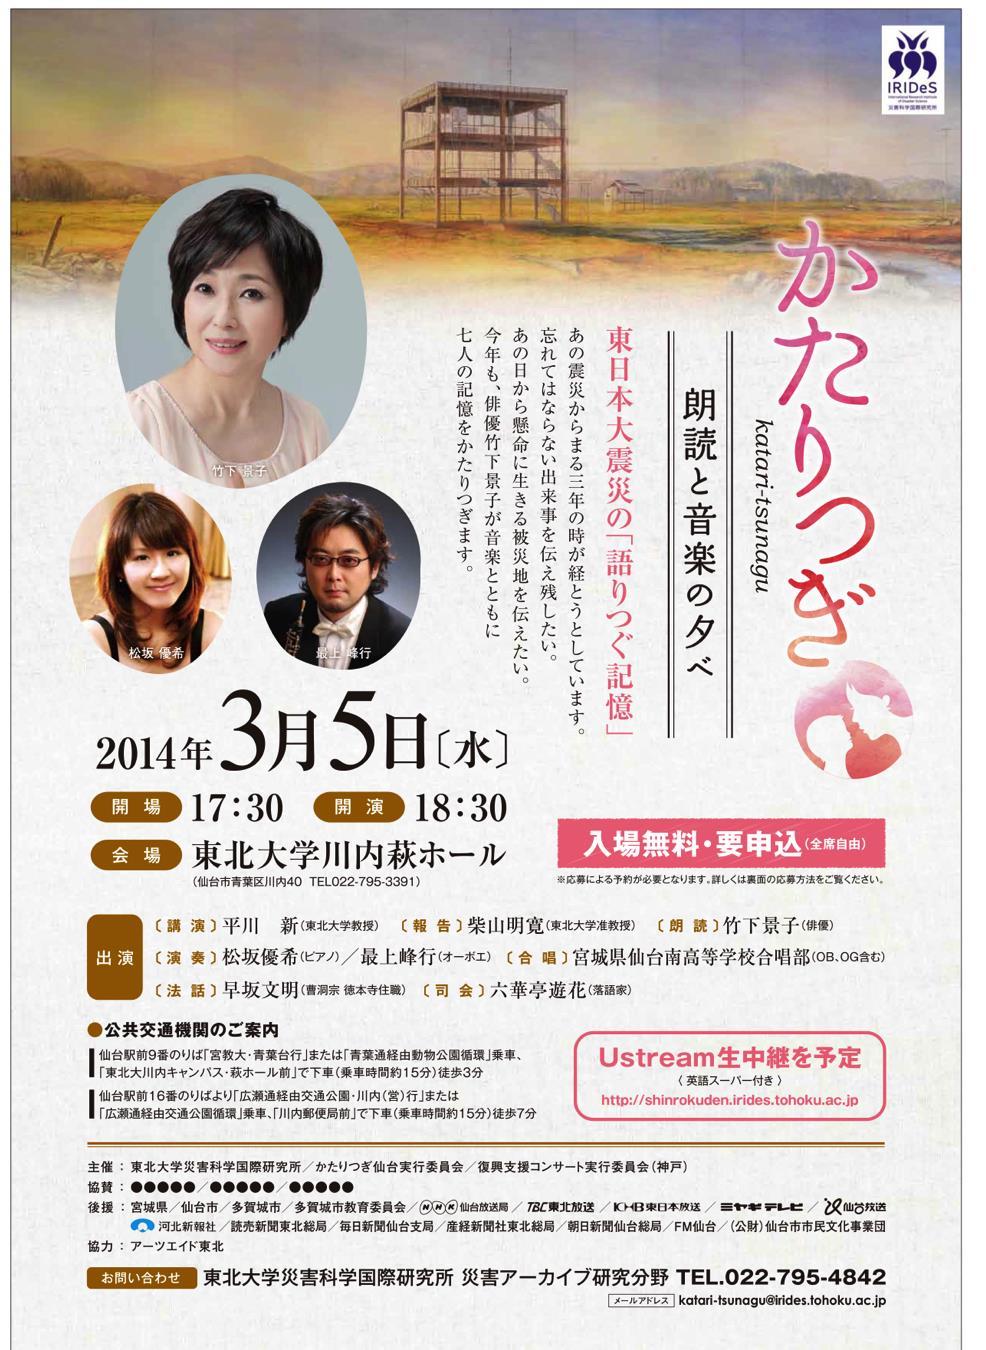 Storytelling Symposium This is the third time in Tohoku after the 2011 Tohoku Earthquake, Mrs.